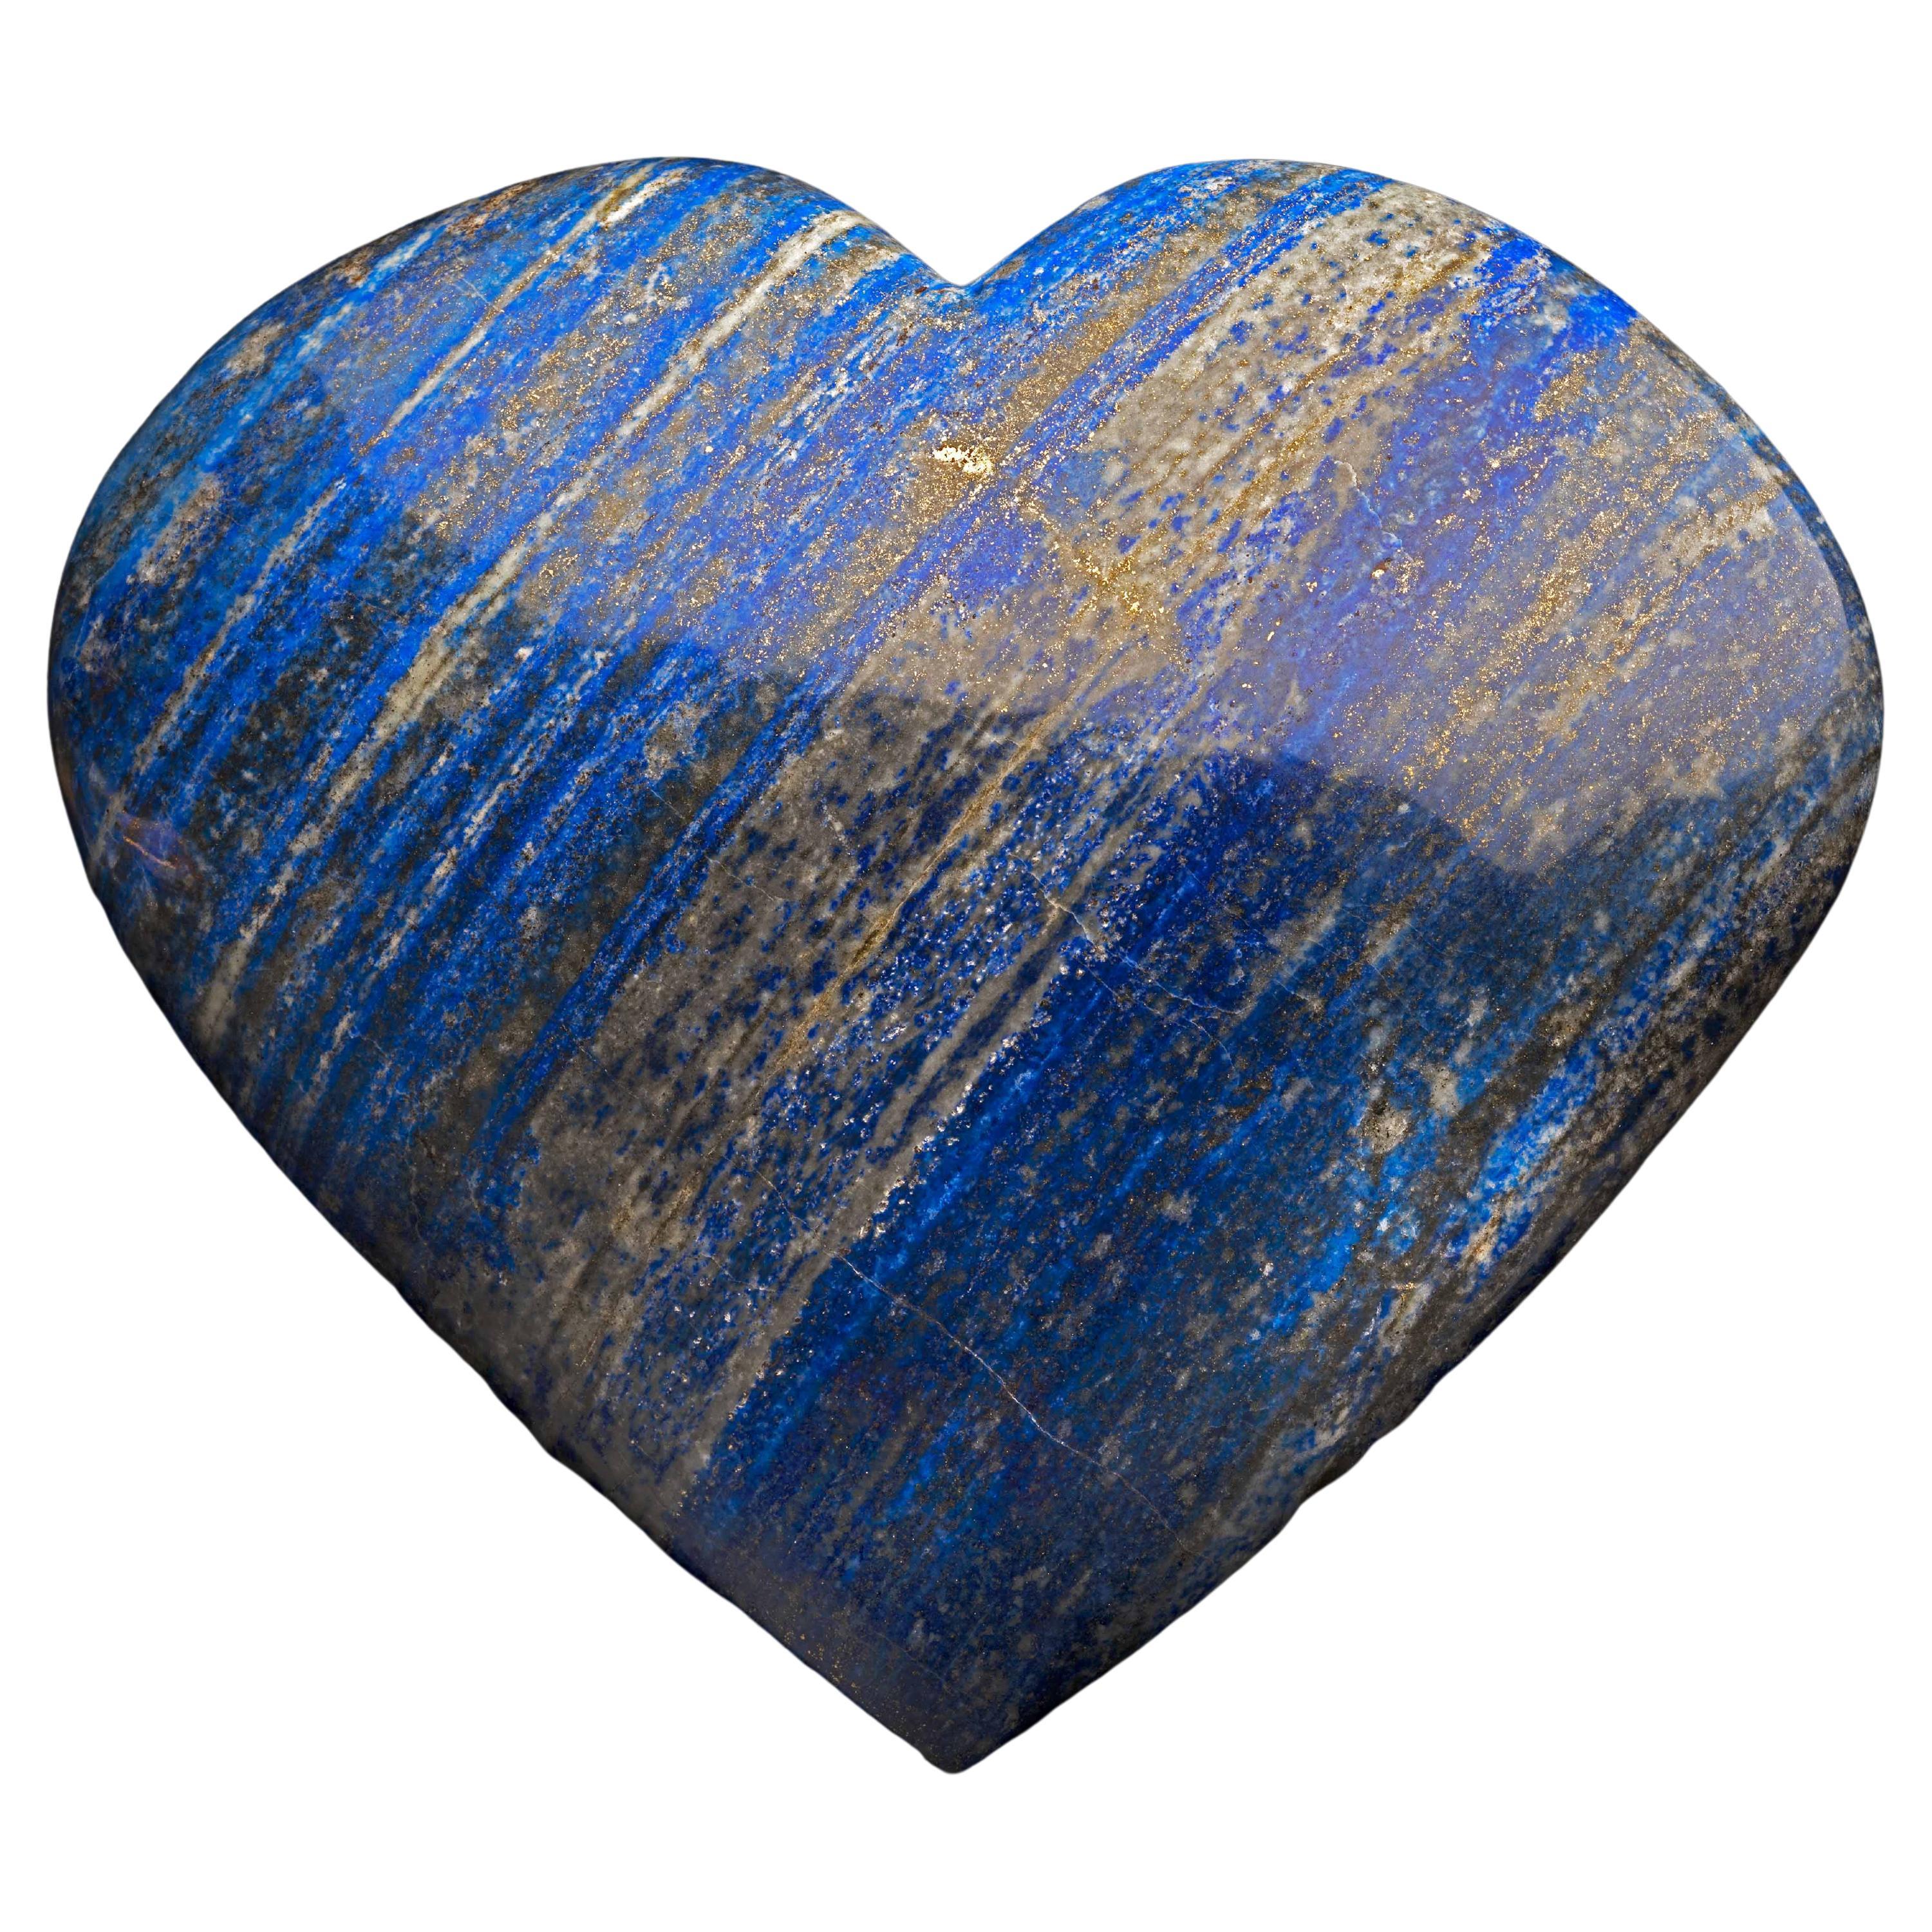 Hand-Carved 23.5 Lb, Lapis Lazuli Heart For Sale